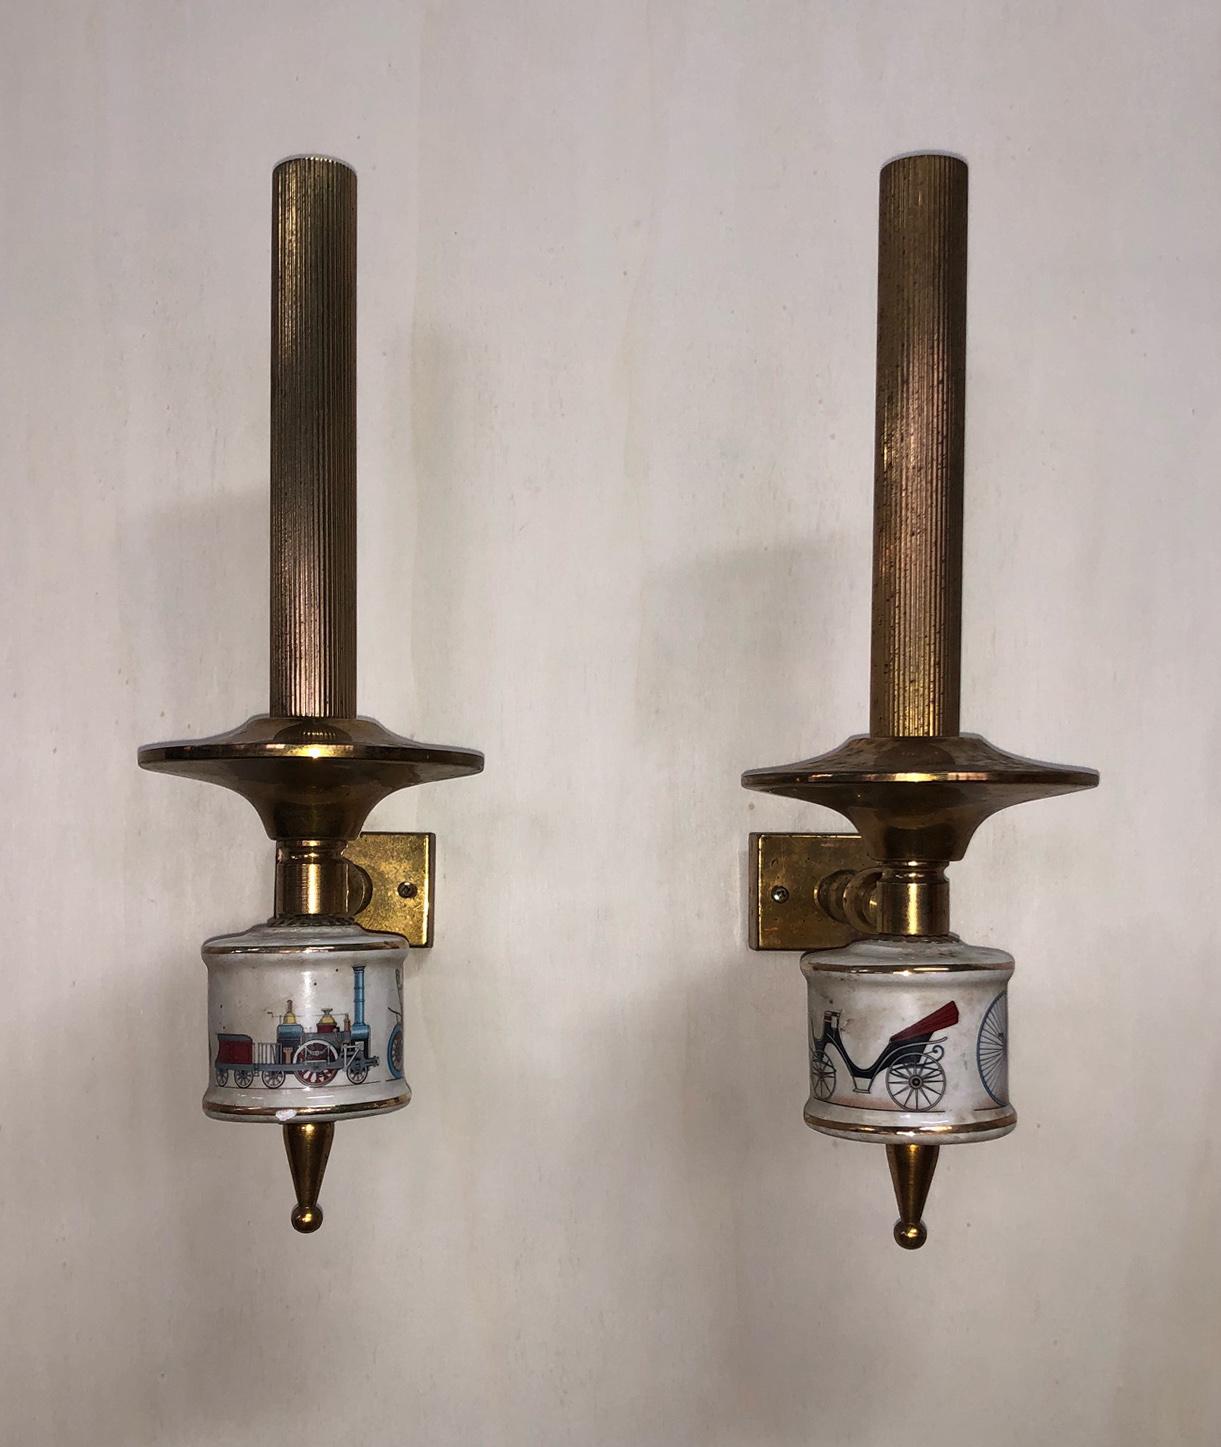 Pair of Original Italian Wall Lights Sconces Brass and Porcelain Design For Sale 1